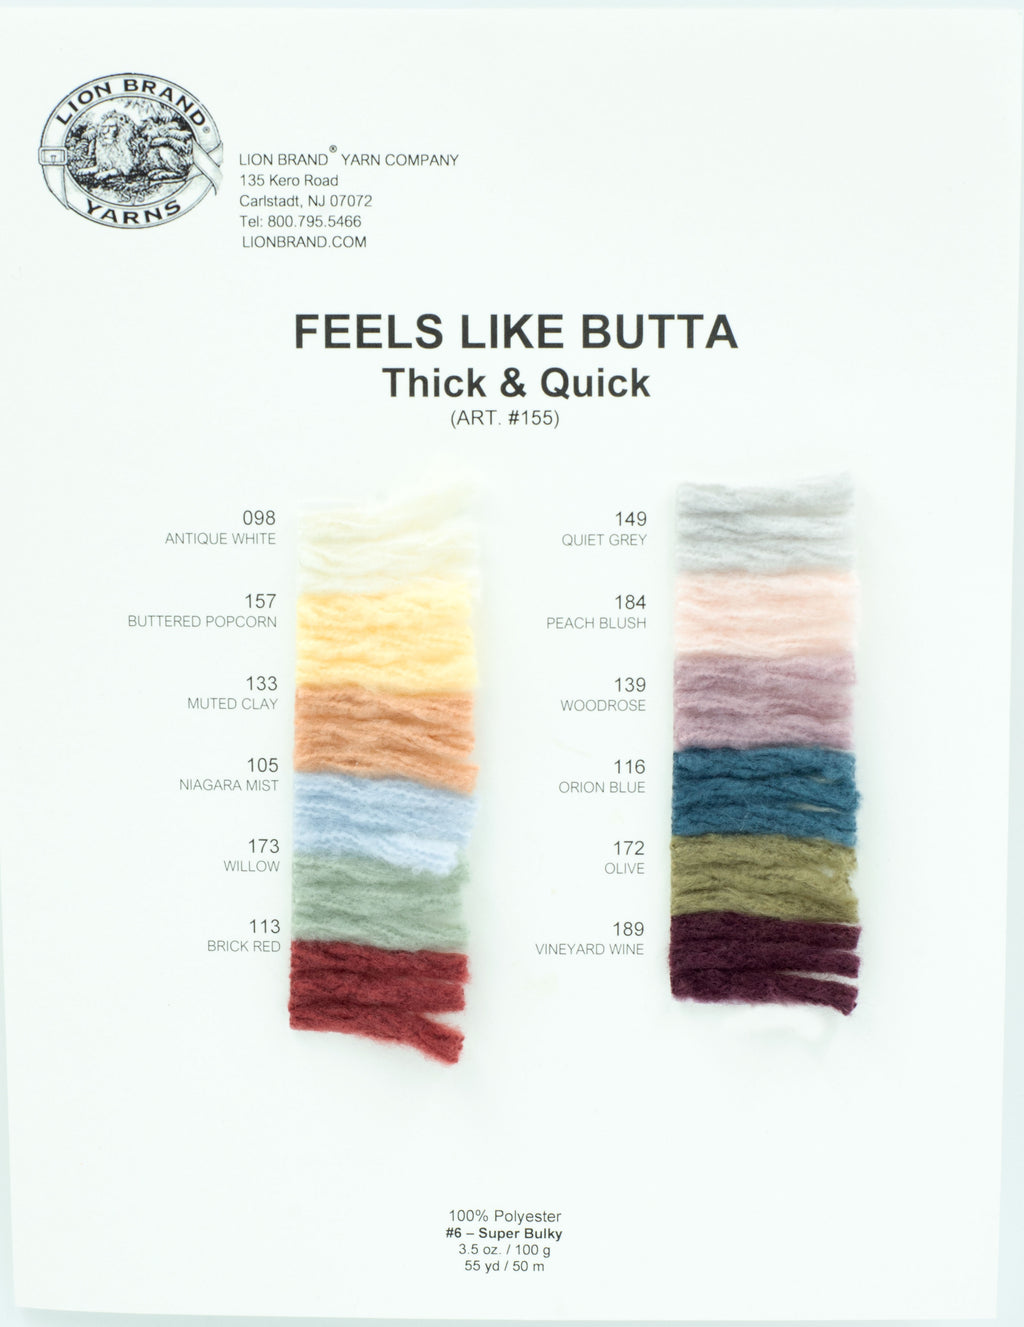 Lion Brand Yarn - Feels Like Butta - 6 Pack with Pattern Cards in